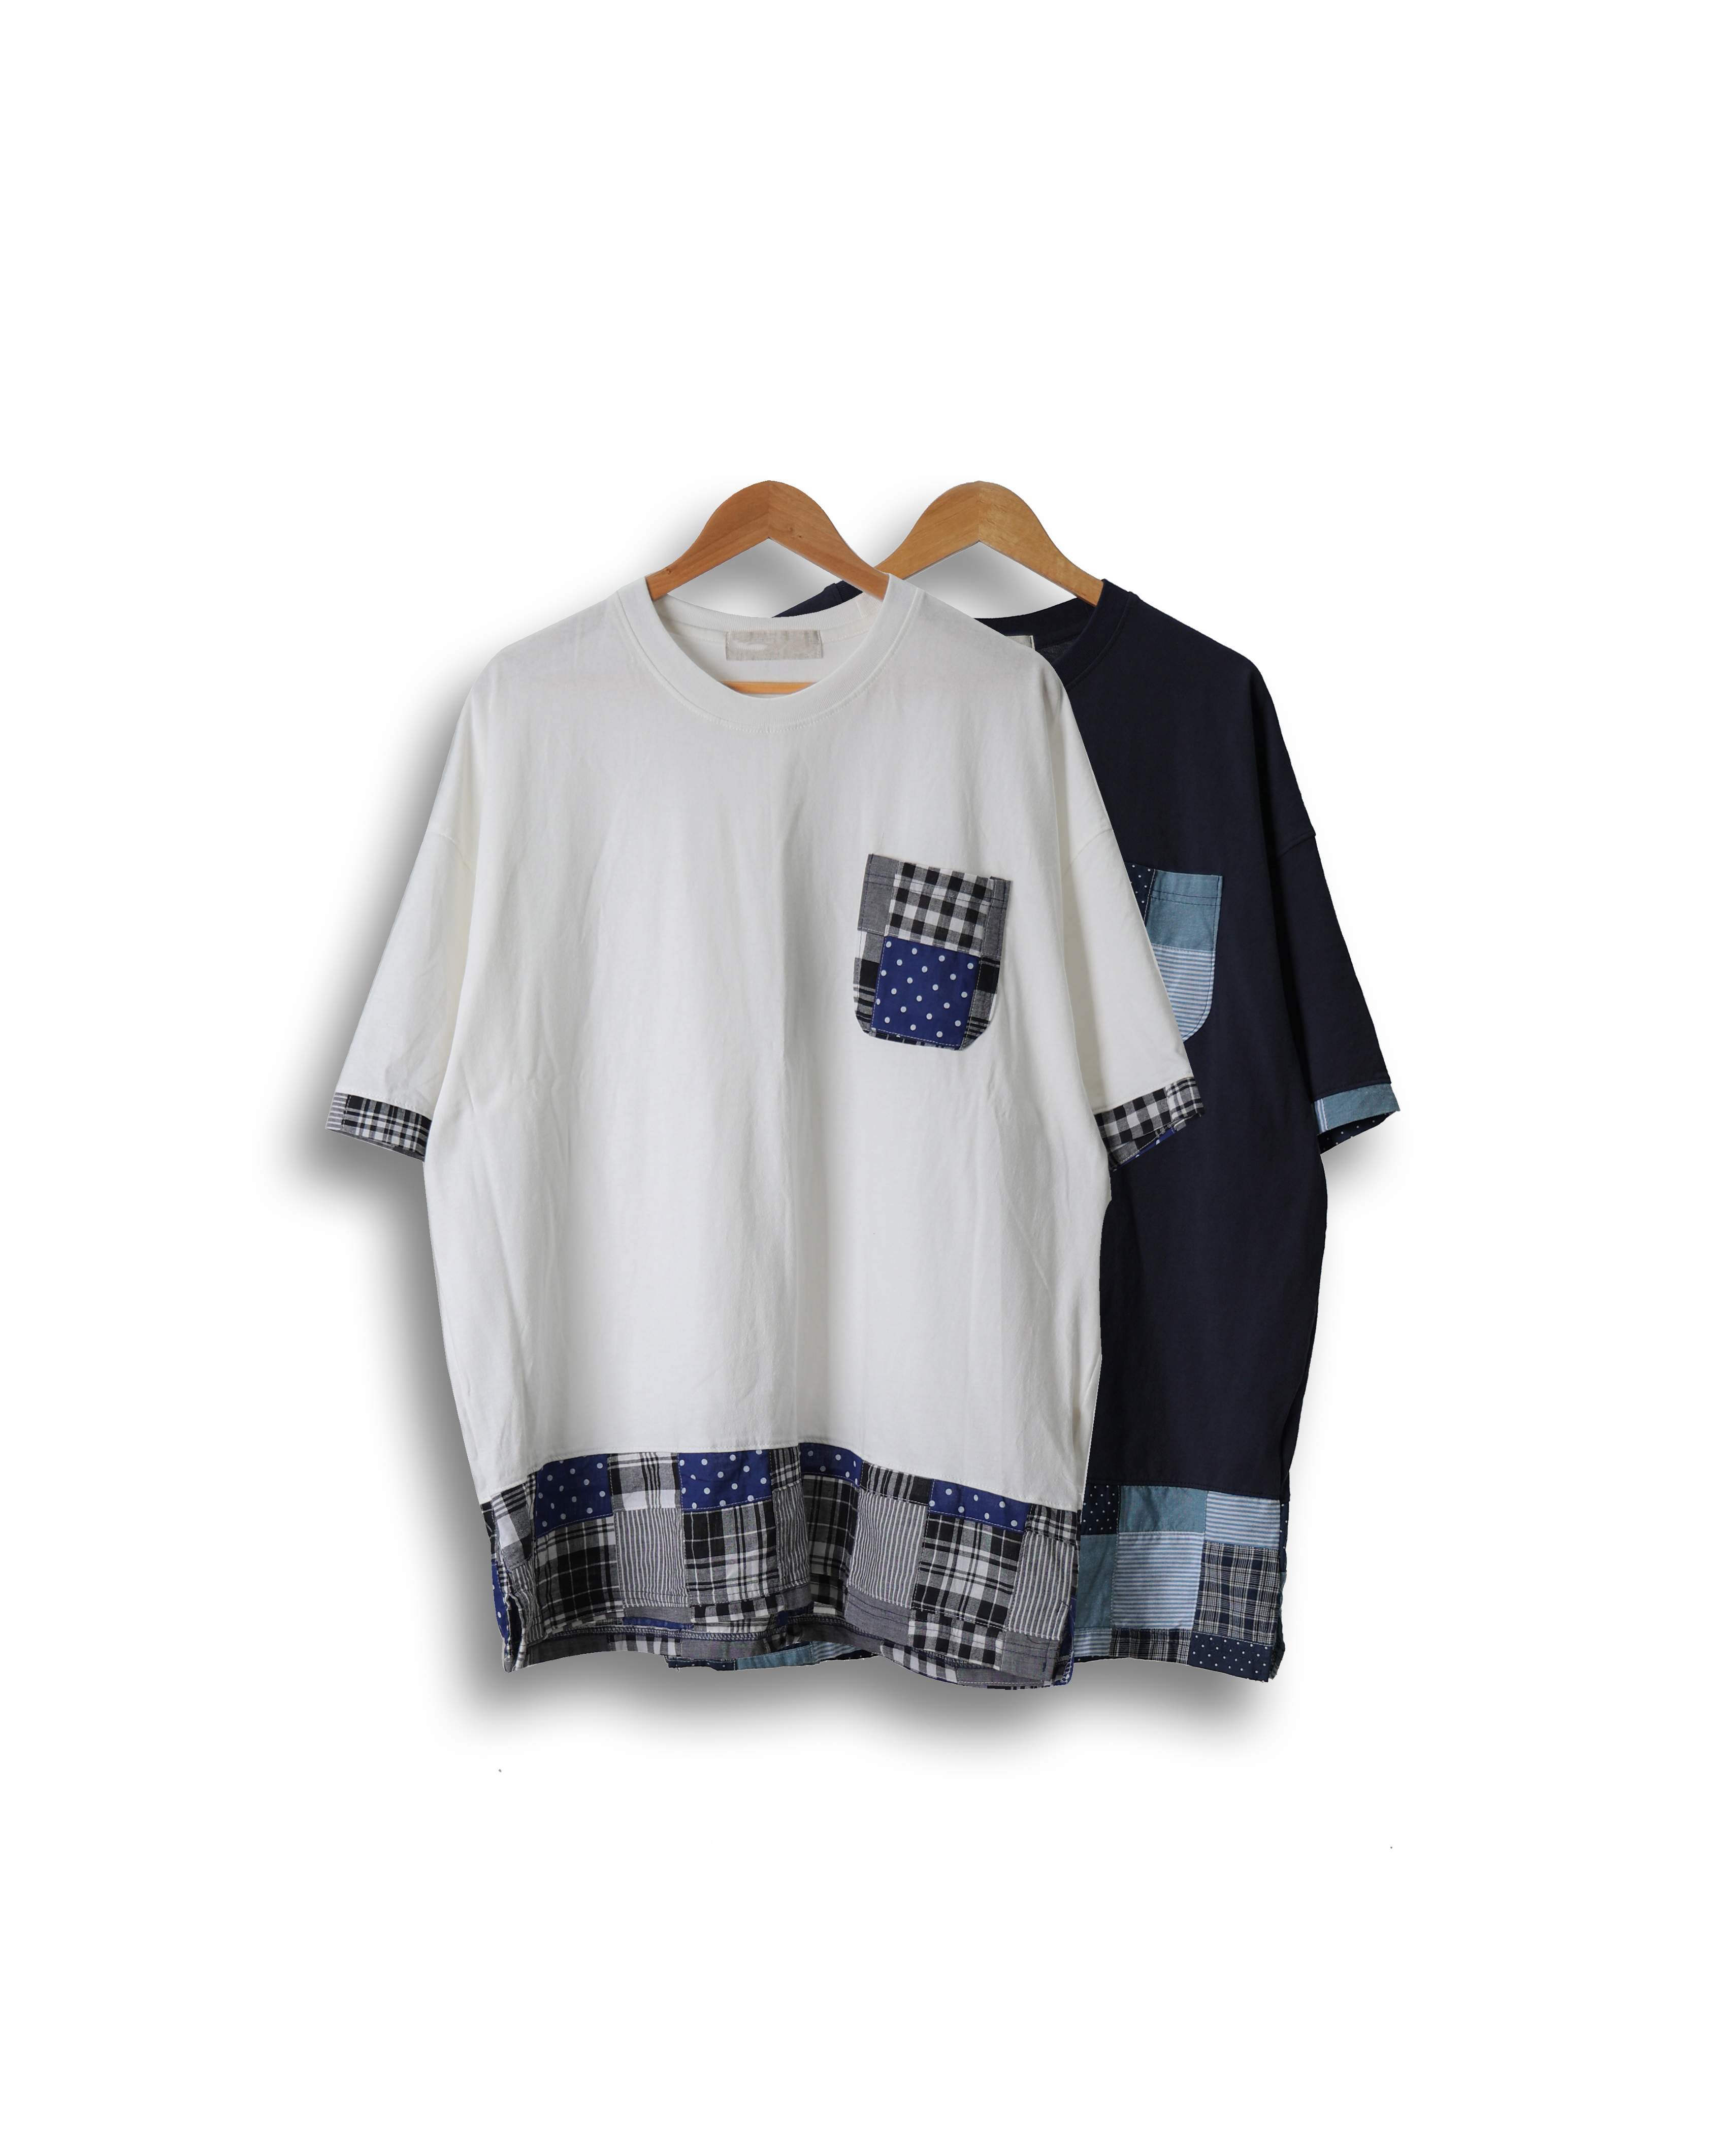 GAUGE Patch Layered Over T Shirts (Navy/Ivory)